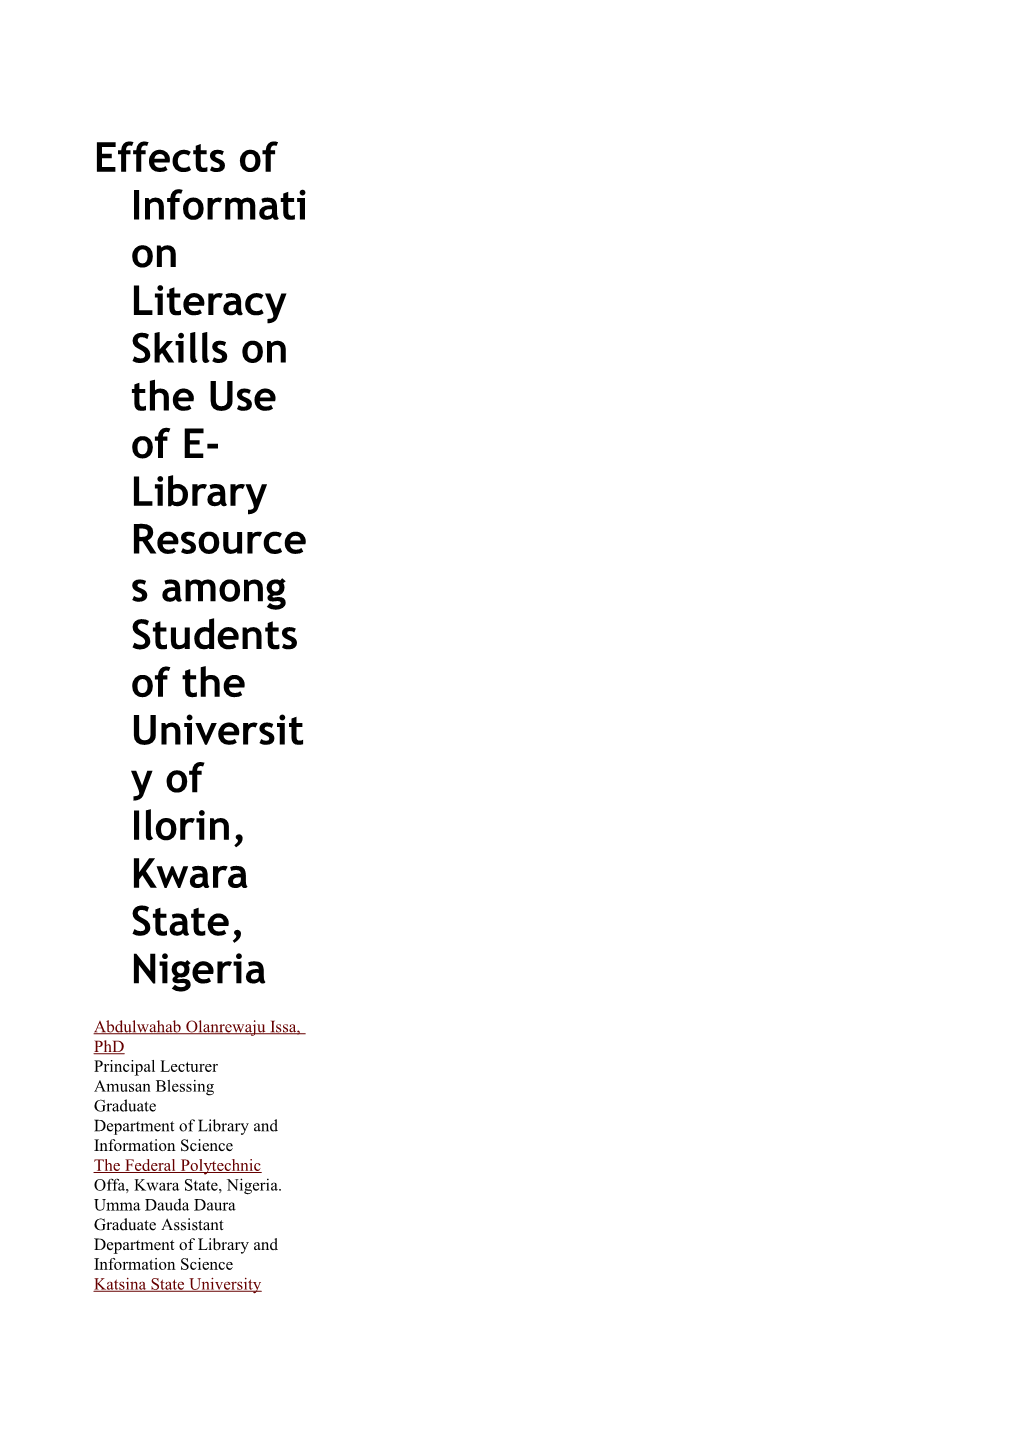 Effects of Information Literacy Skills on the Use of E-Library Resources Among Students